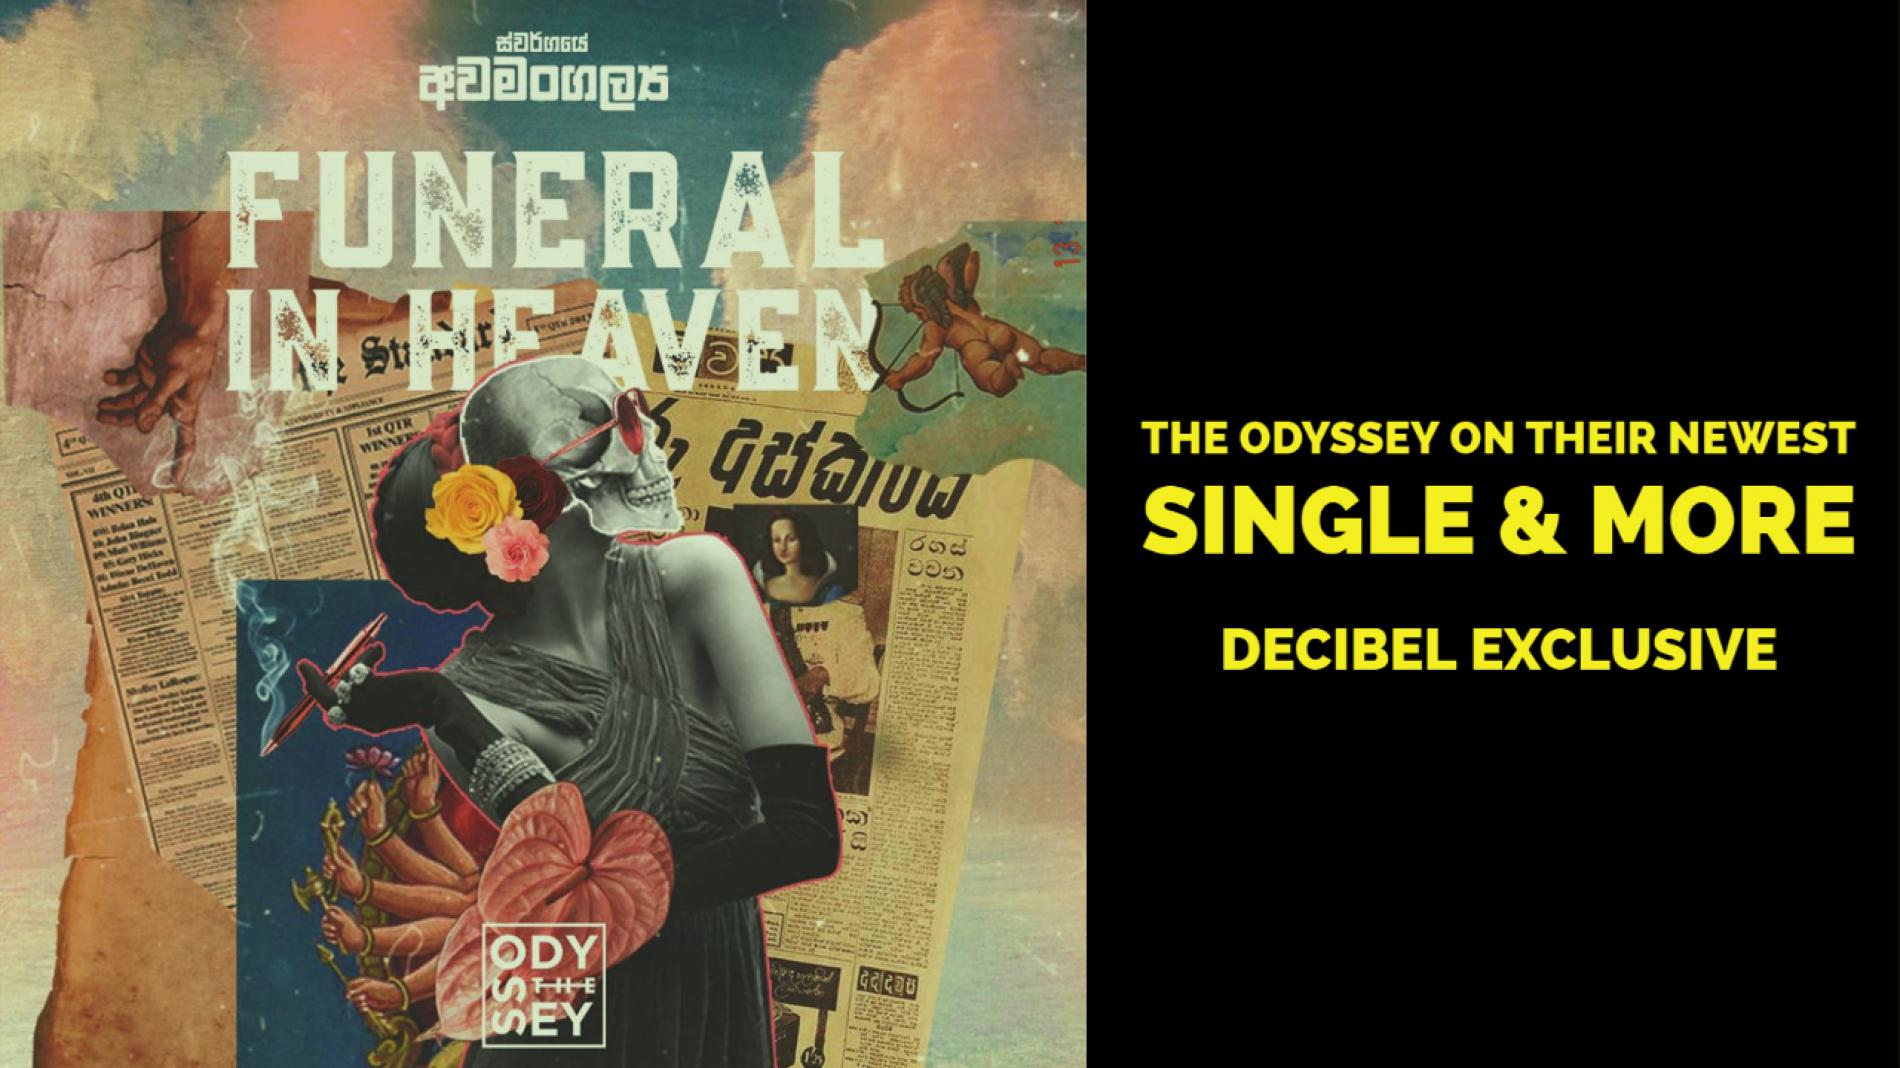 Exclusive : The Odyssey On Their Single Funeral In Heaven & More